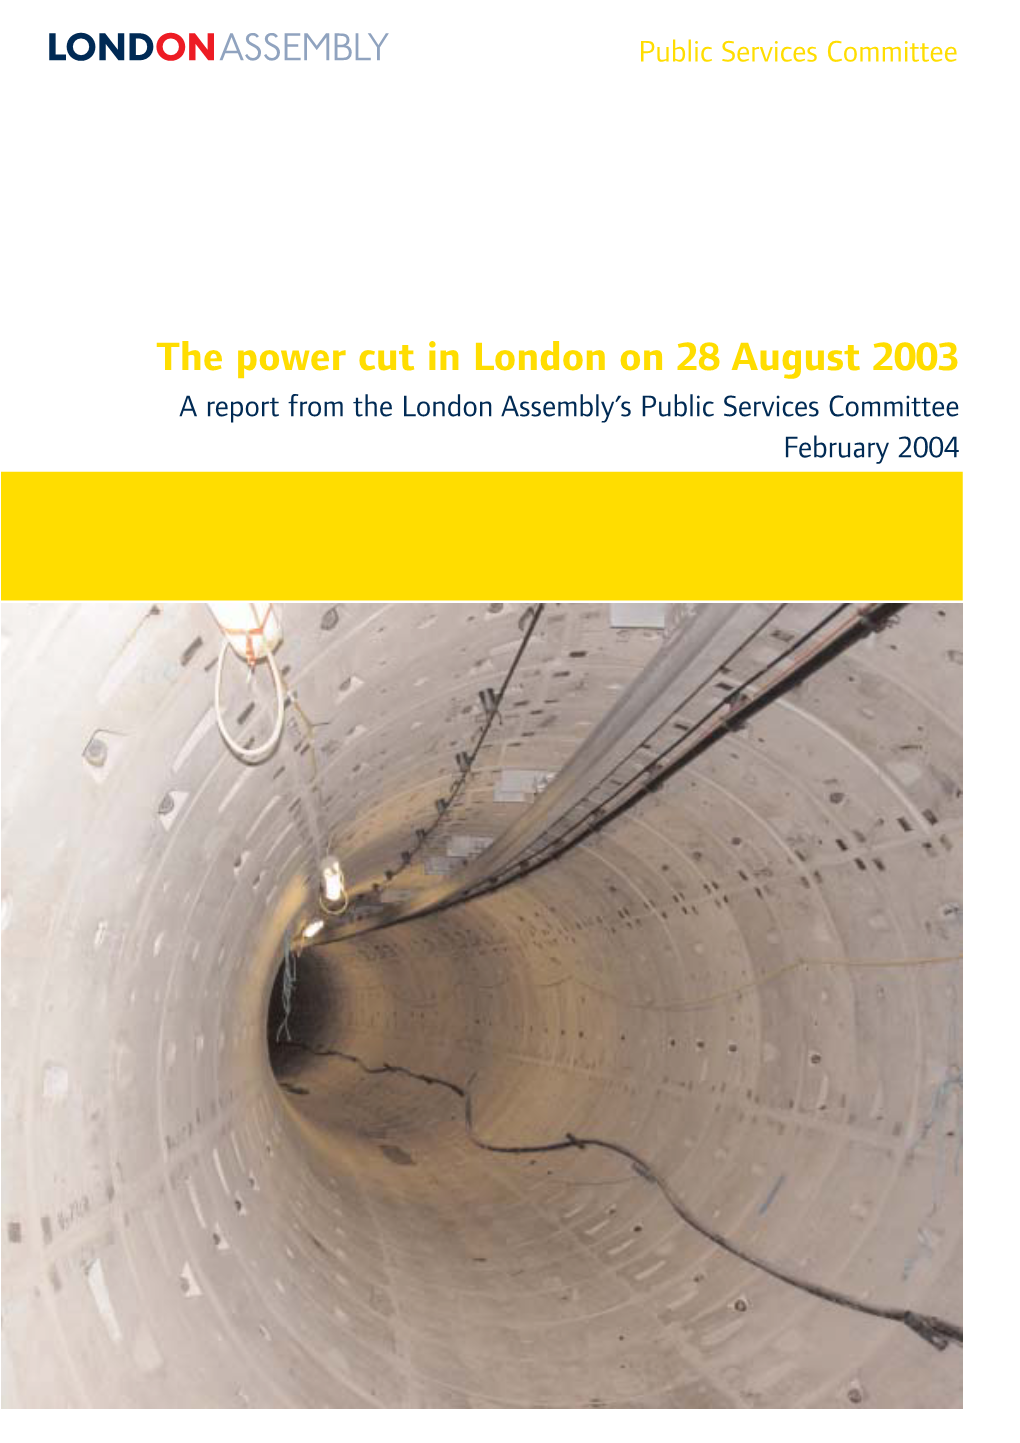 The Power Cut in London on 28 August 2003 a Report from the London Assembly’S Public Services Committee February 2004